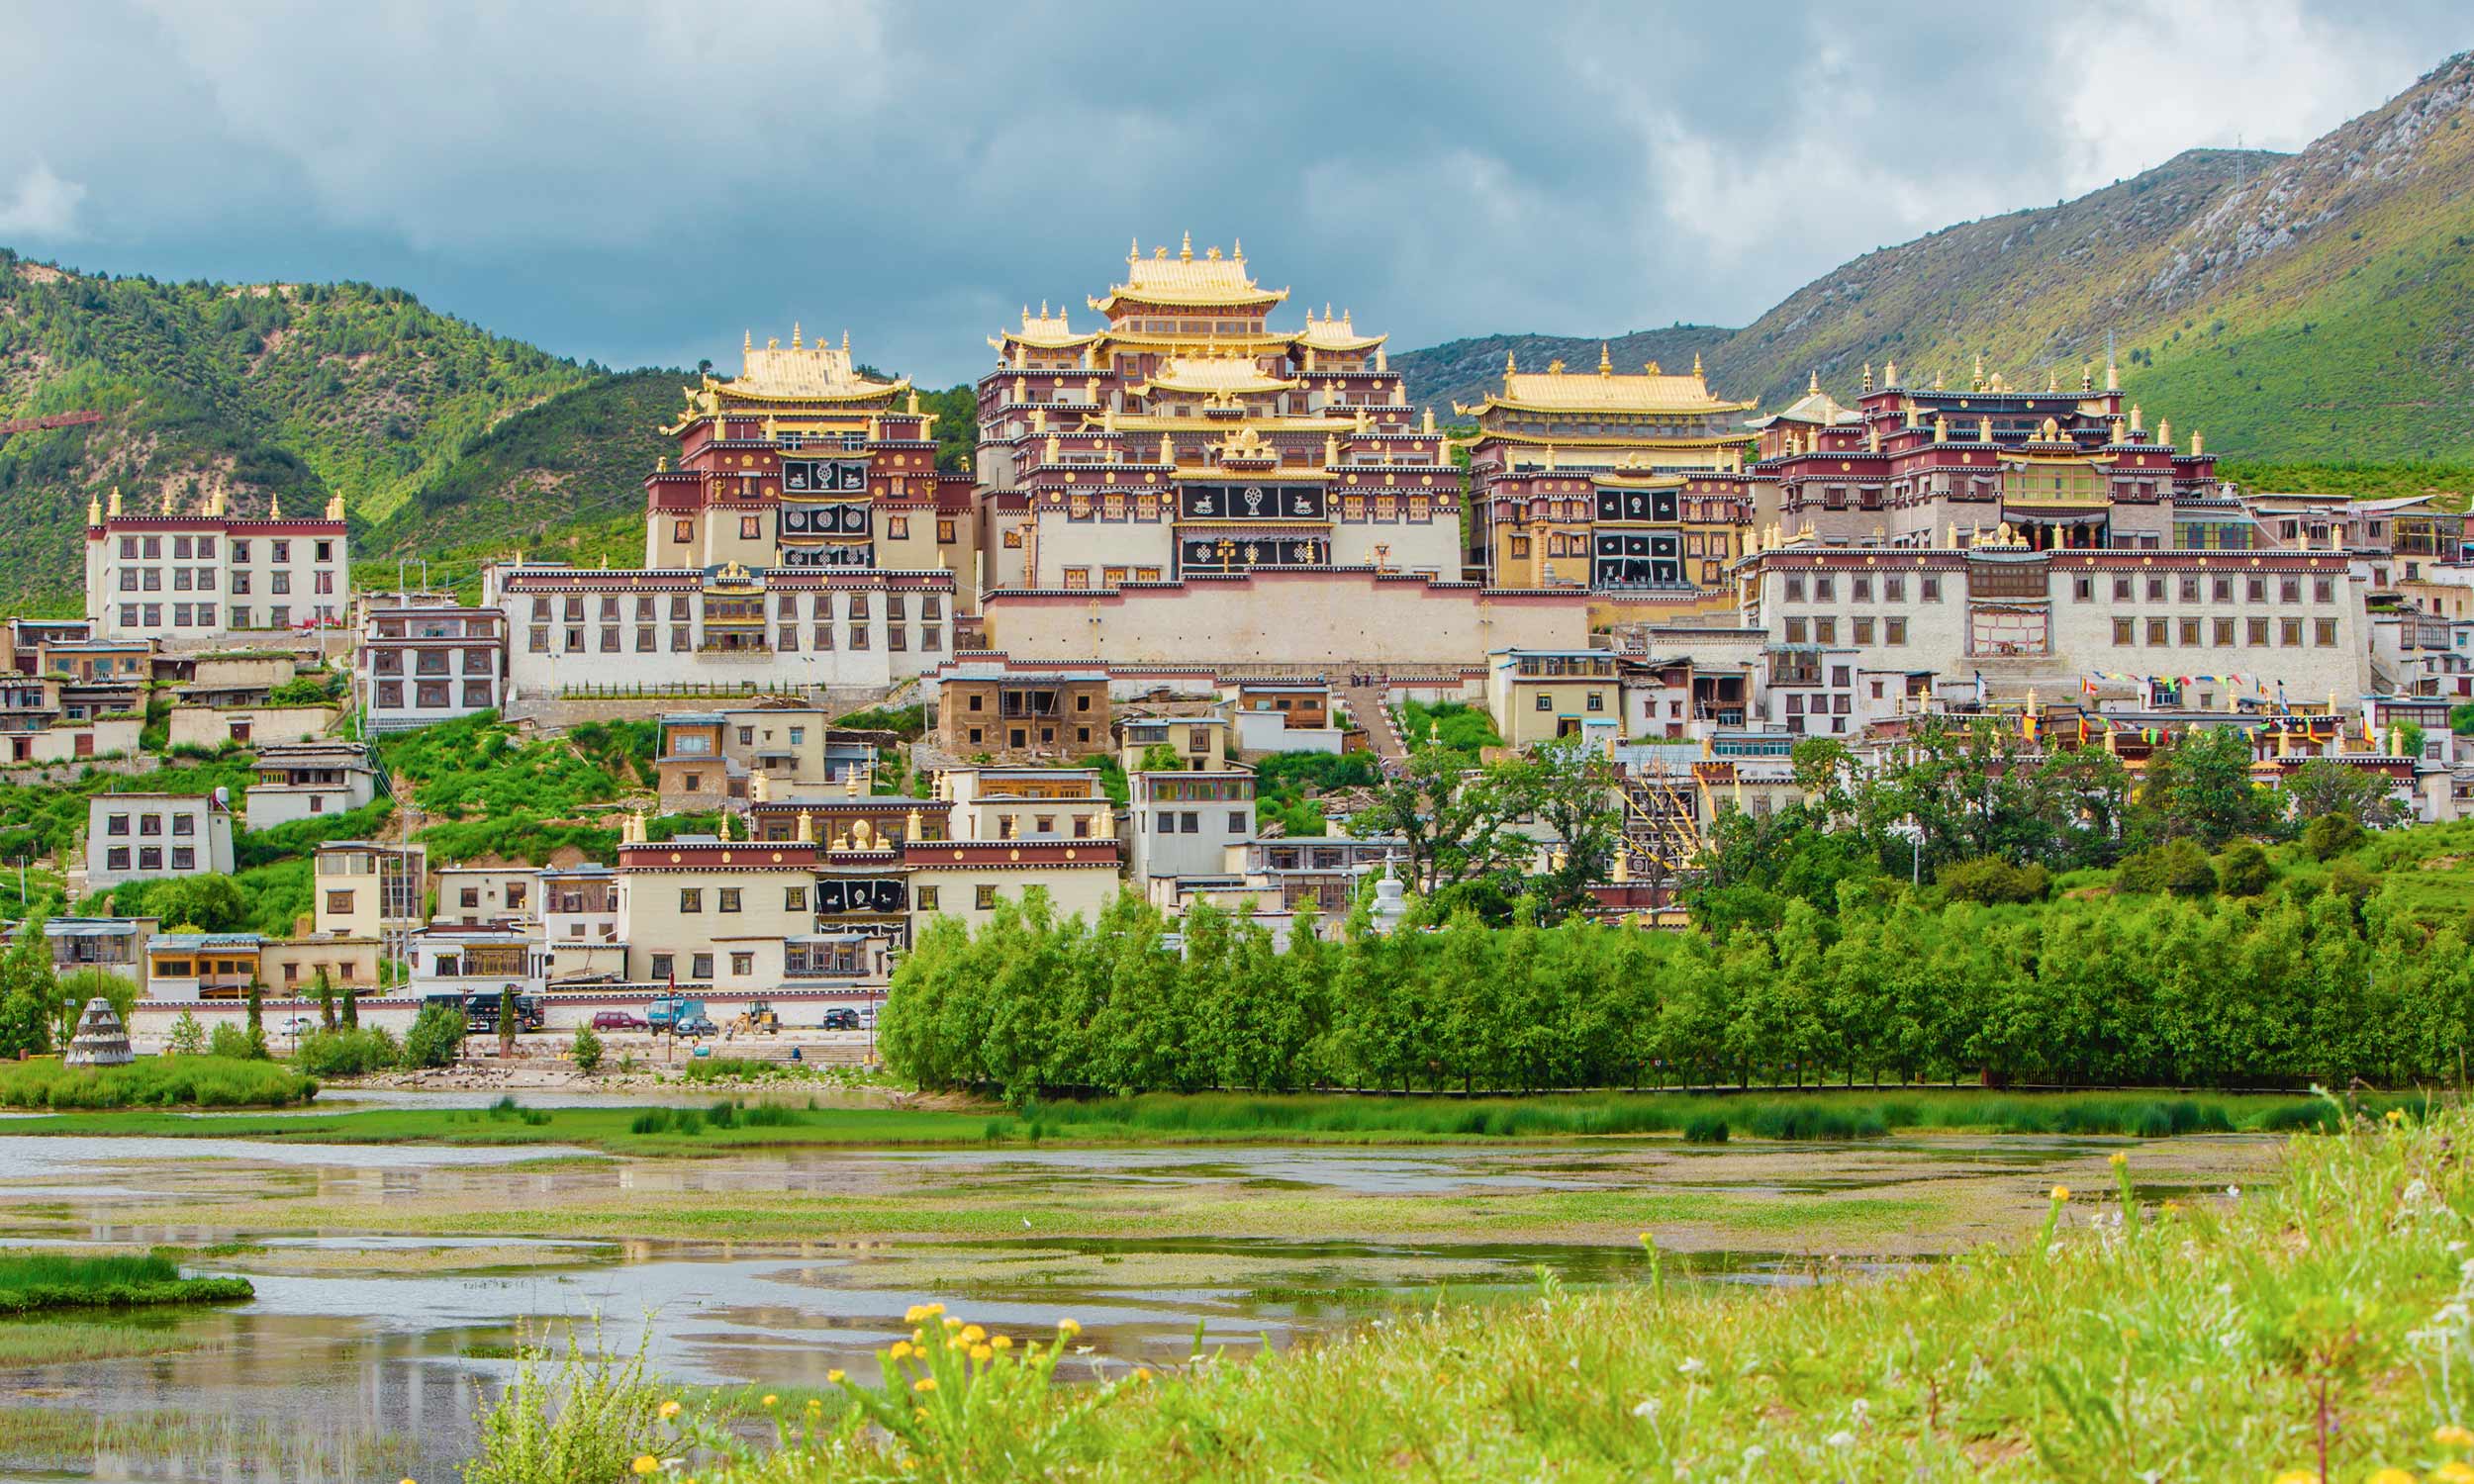   The Ganden Sumtseling Monastery towers over the village in Shangri-La.  